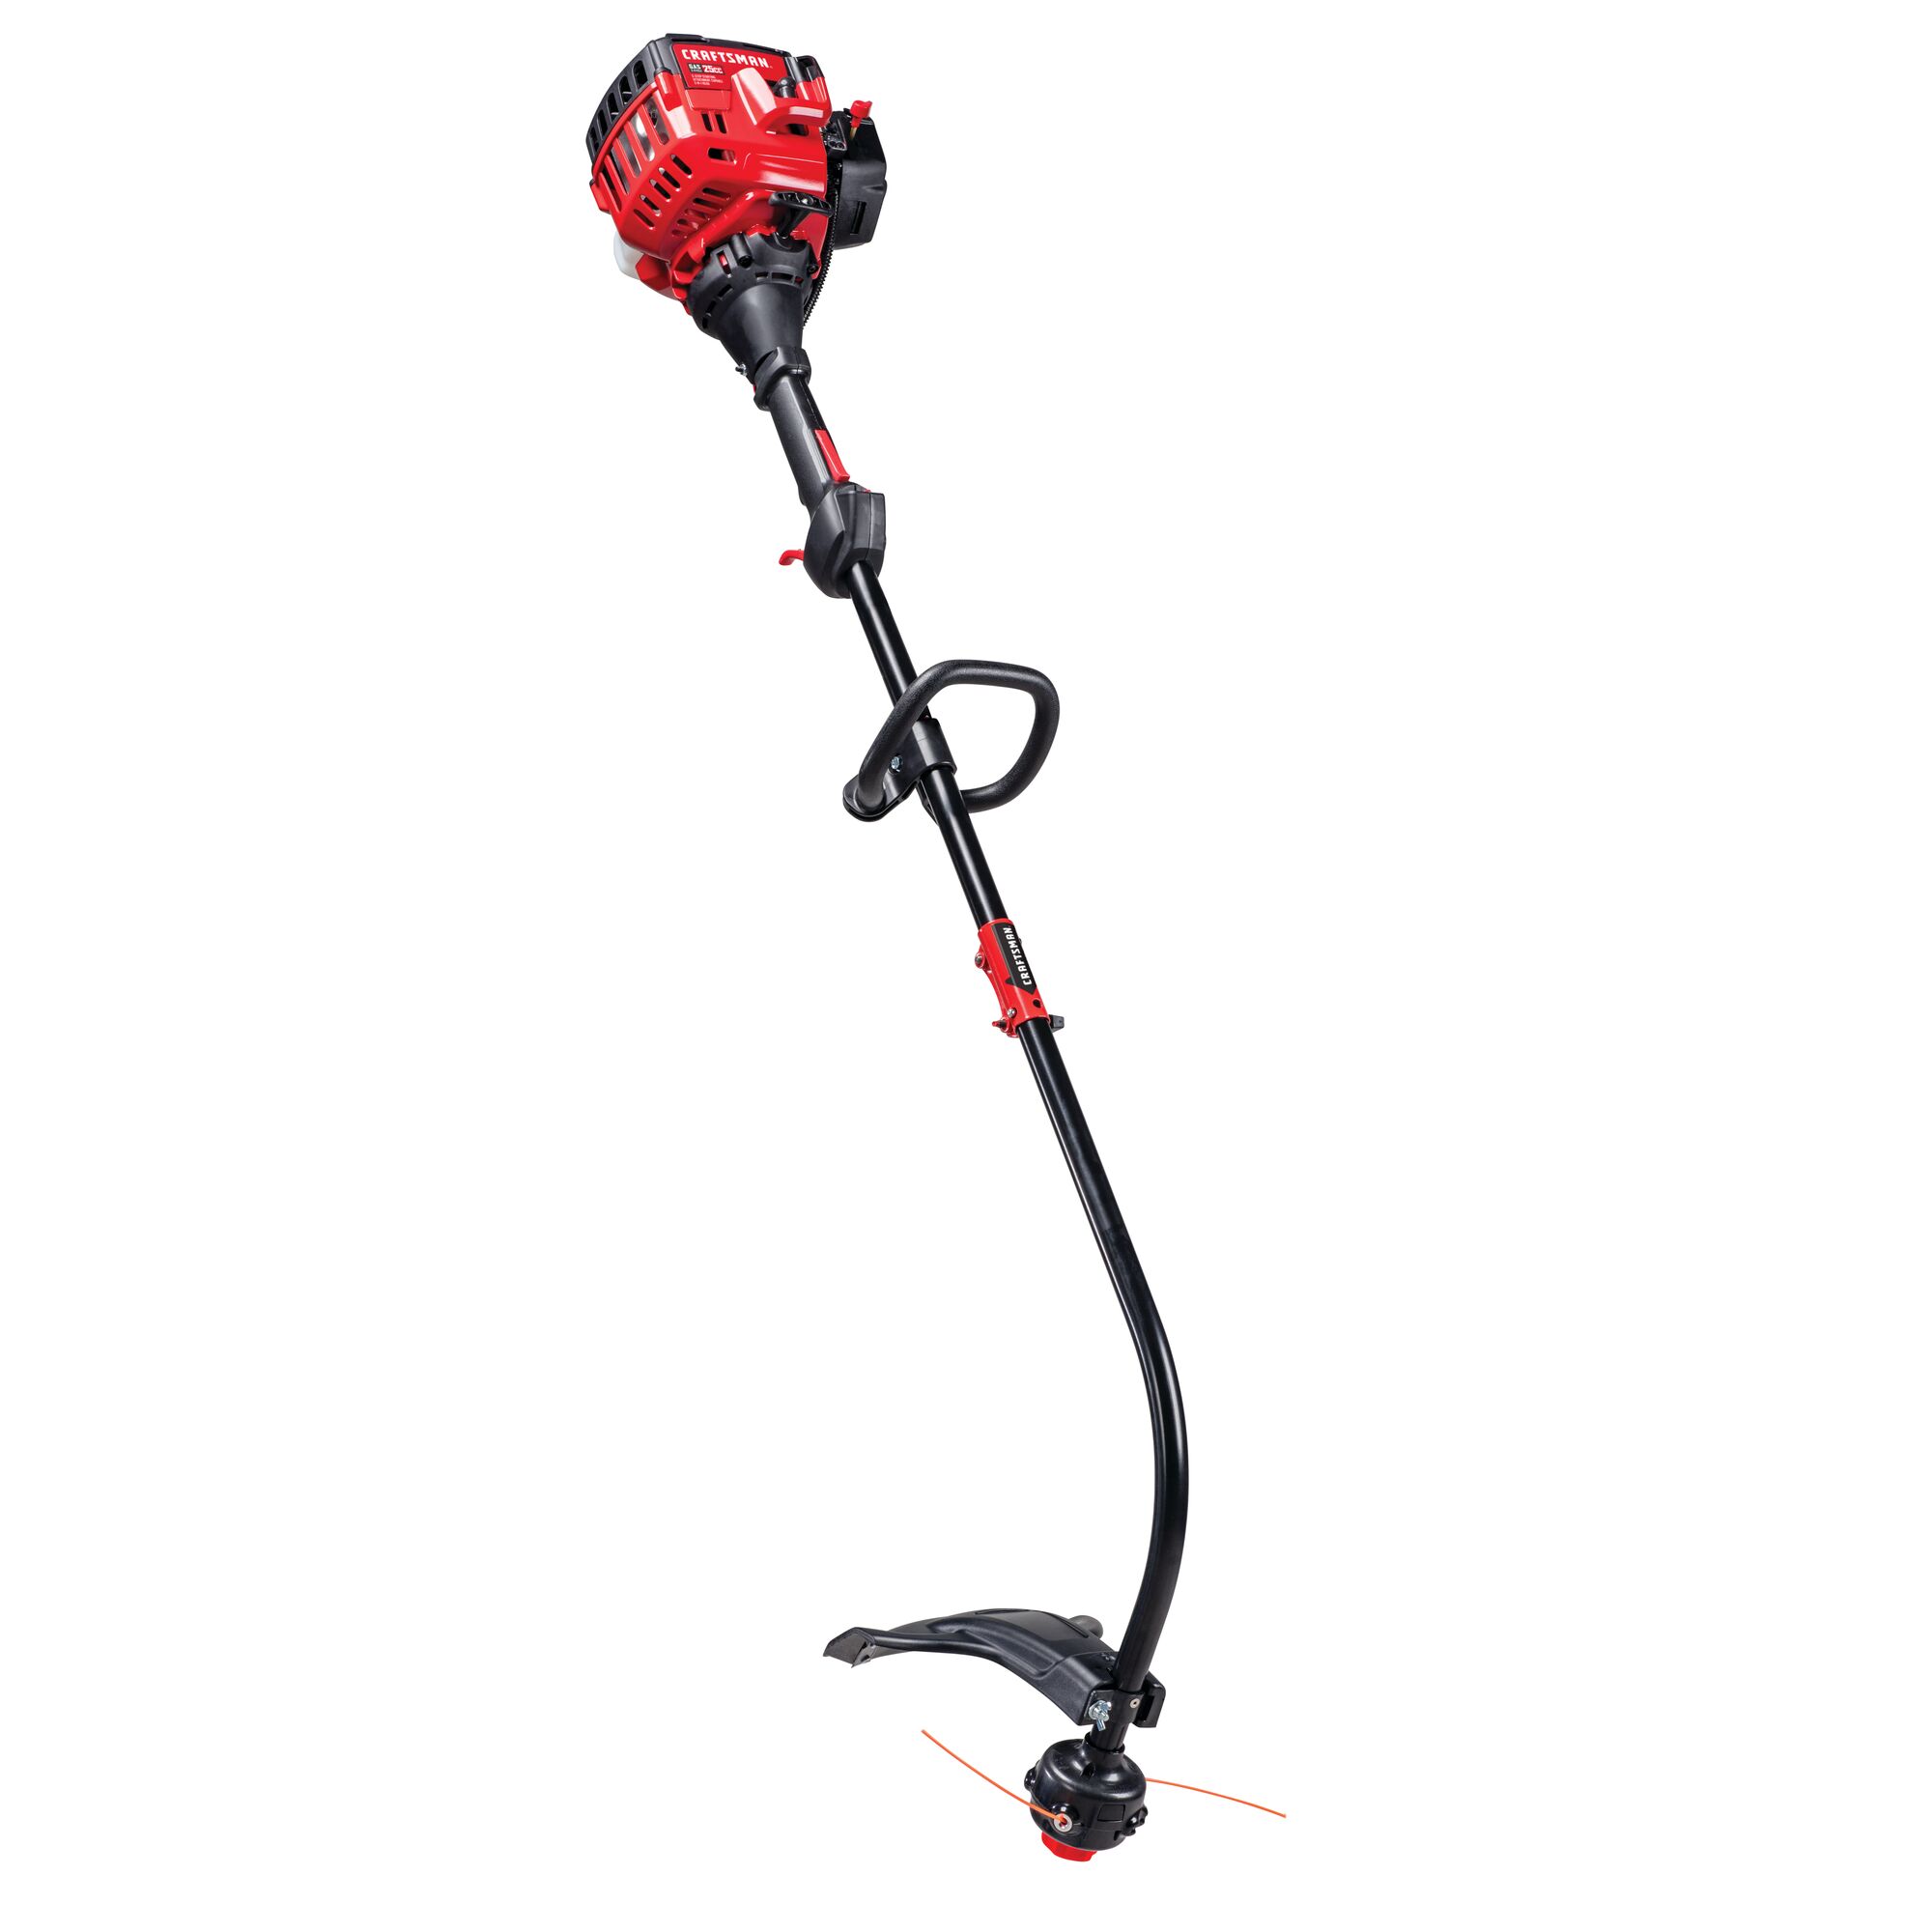 Left profile of 2 Cycle 17 inch curved shaft gas weedwacker trimmer.